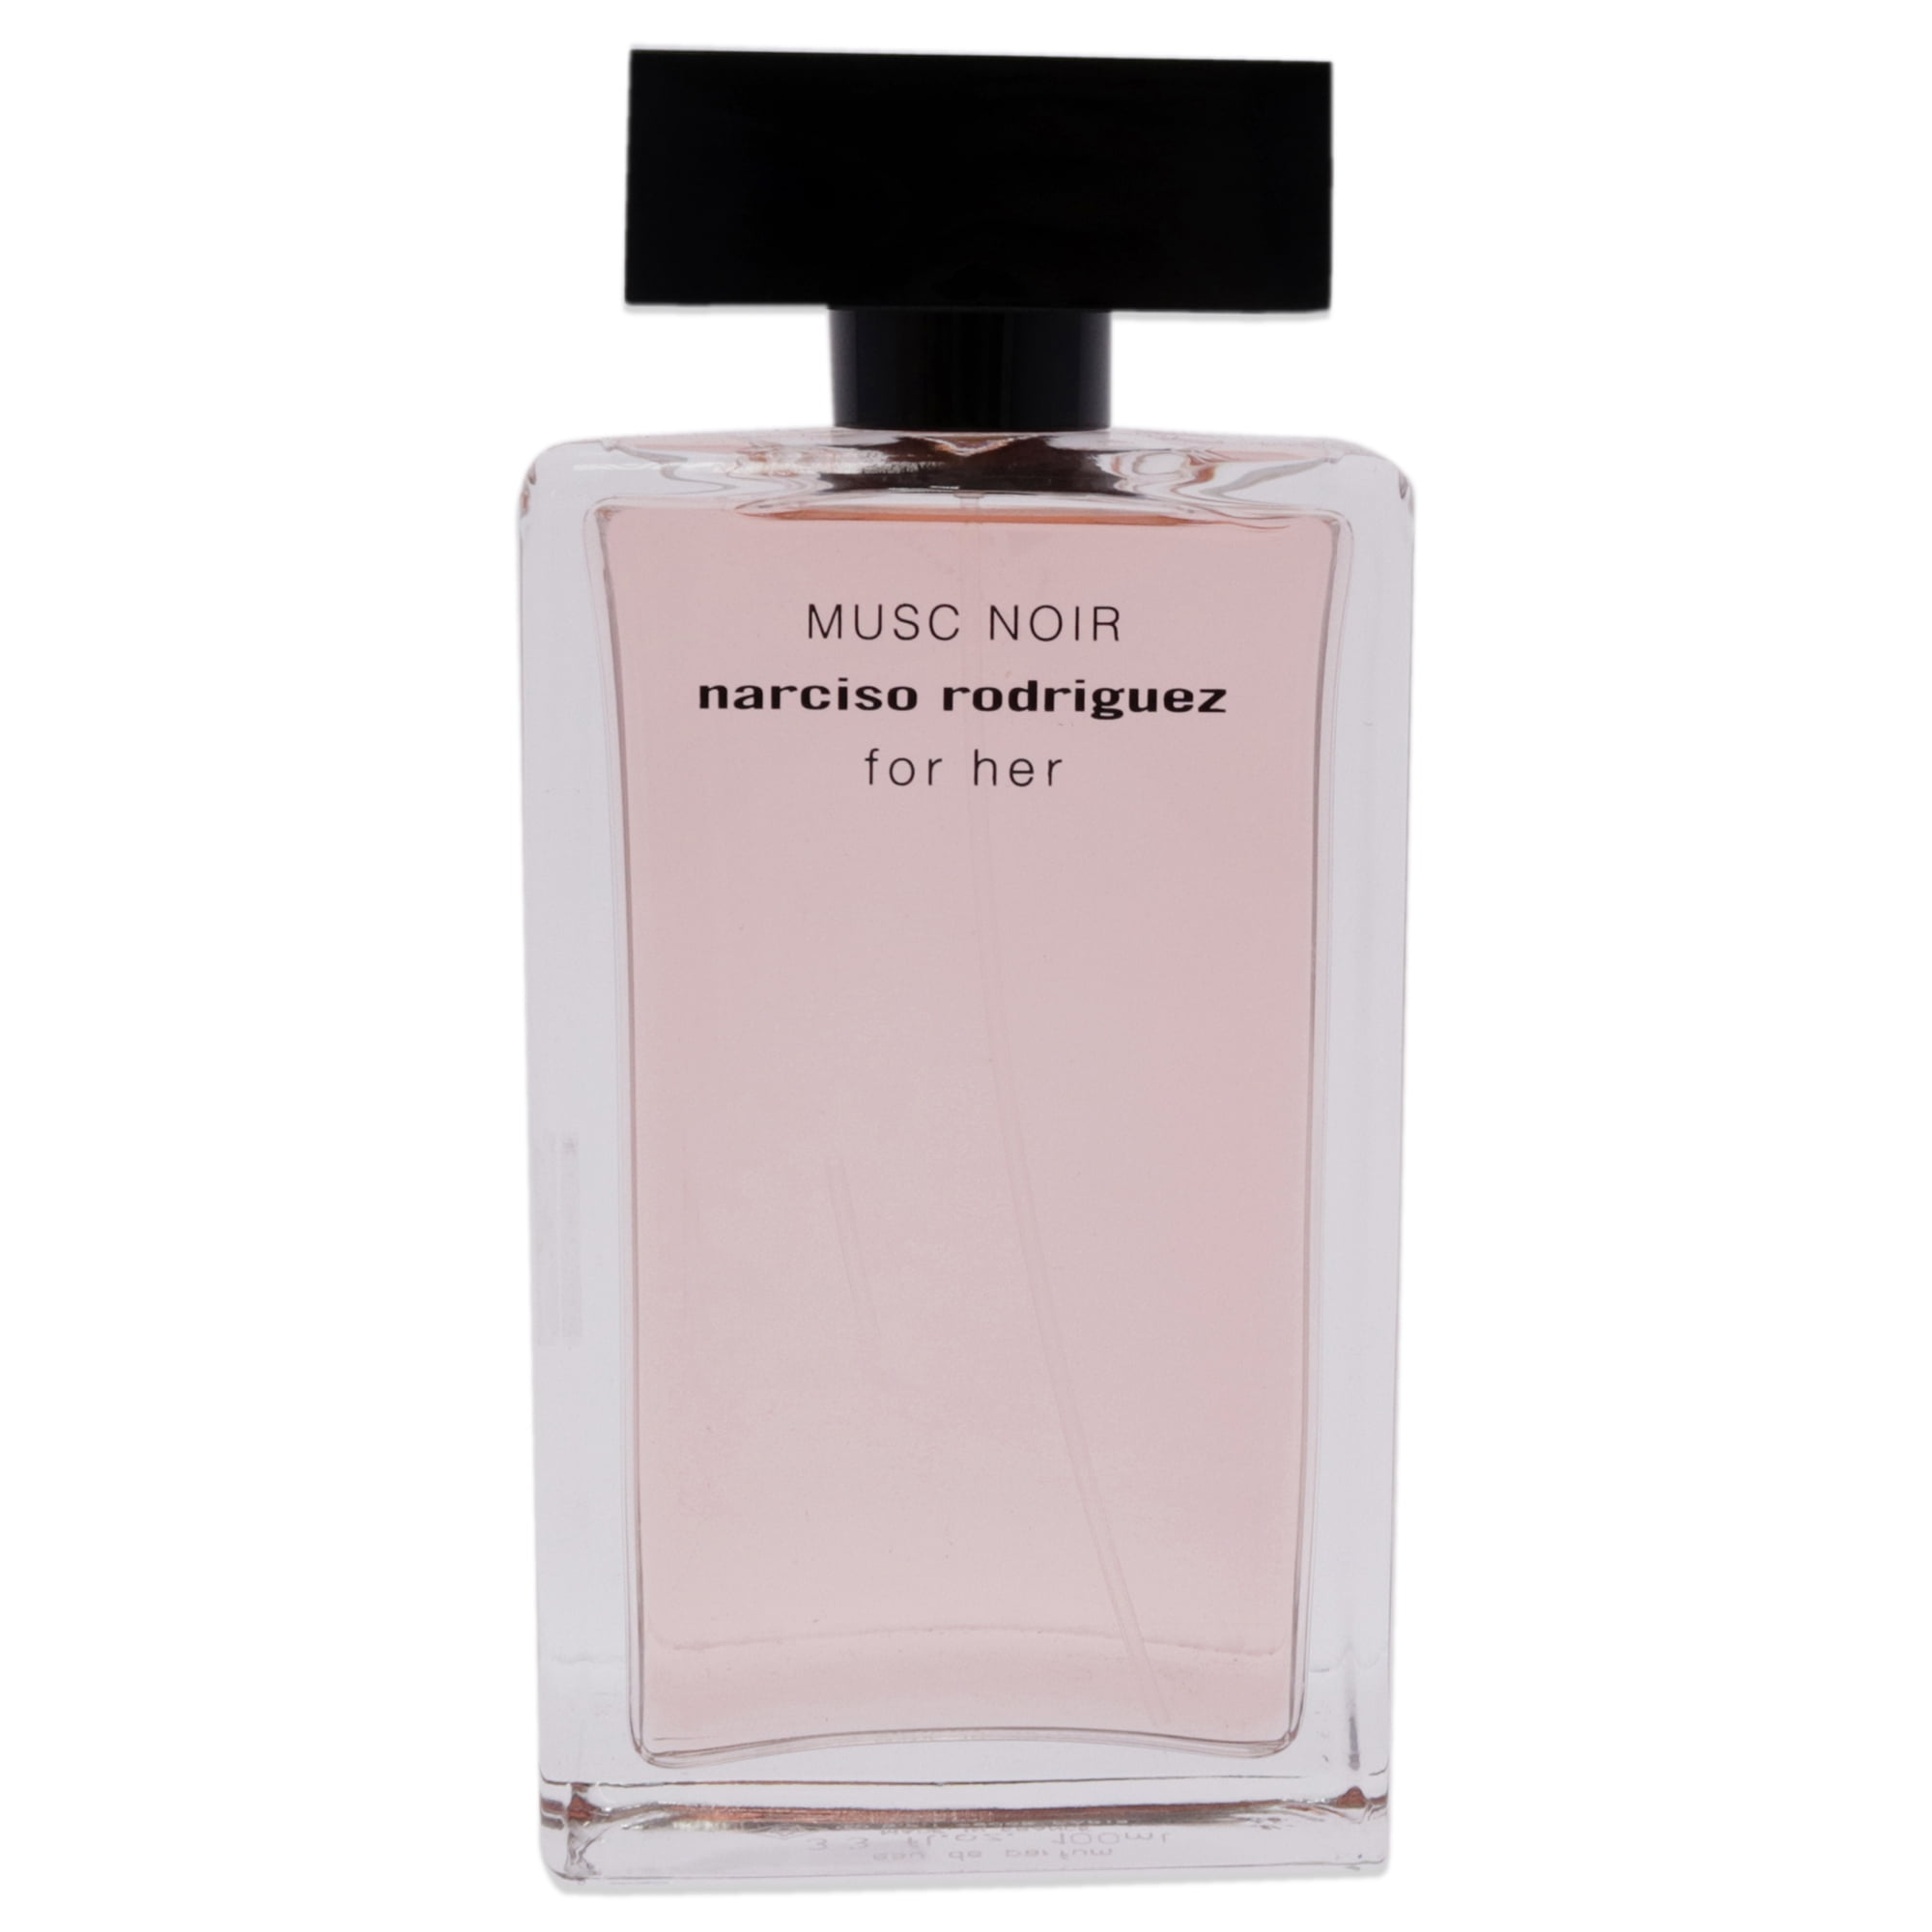 Narciso rodriguez musc noir rose. Narciso Rodriguez Musc Noir. Narciso Rodriguez Musc Noir Rose for her. Musc Noir Narciso Rodriguez Tester. Парфюмерная вода Narciso Rodriguez for her 100 мл.